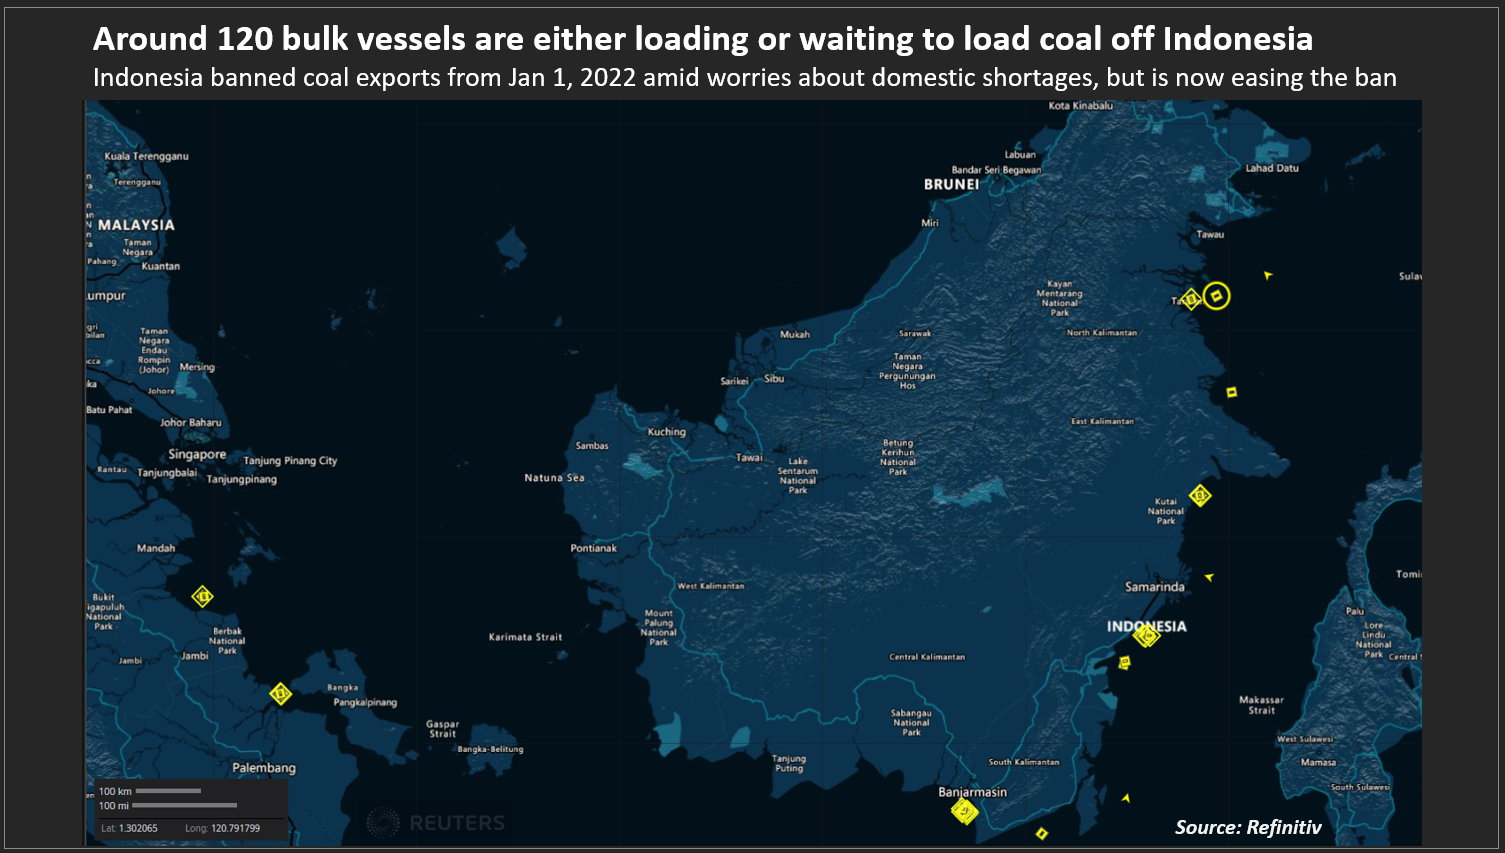 Around 120 bulk vessels are either loading or waiting to load coal off Indonesia